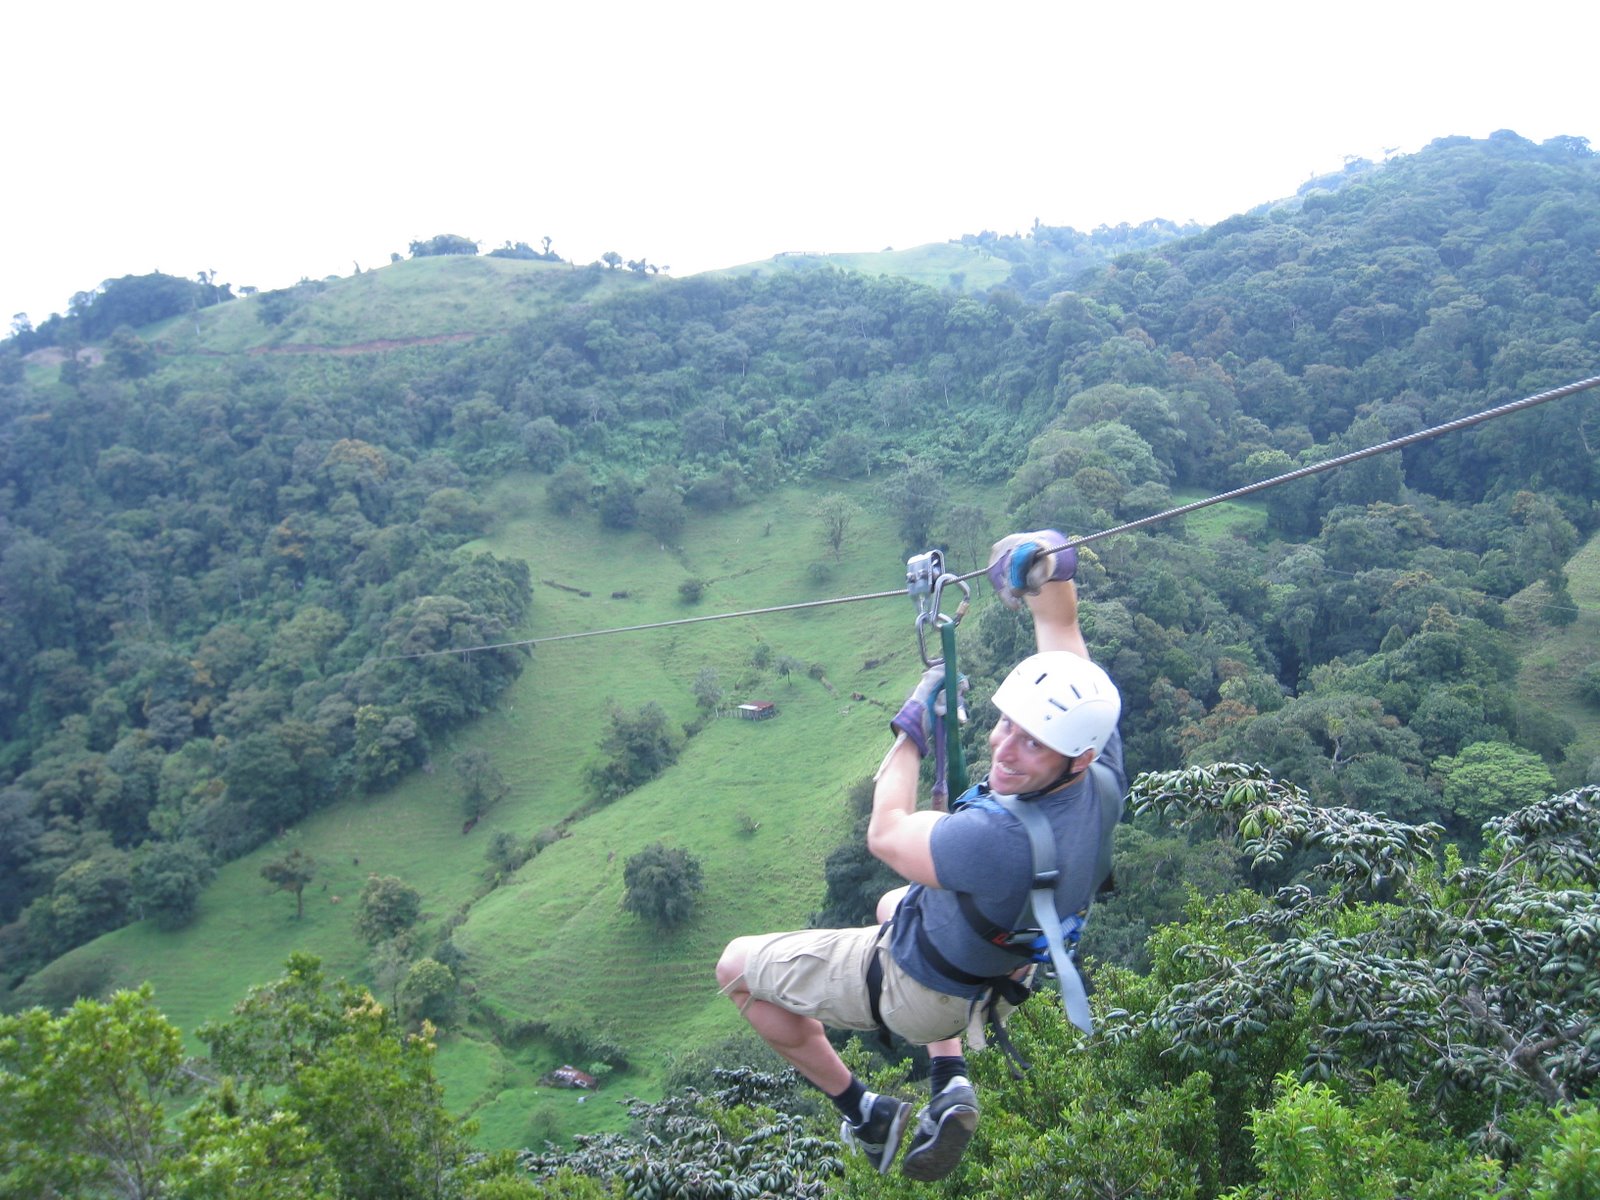  Zip-lining in the rain forest of Costa Rica. 